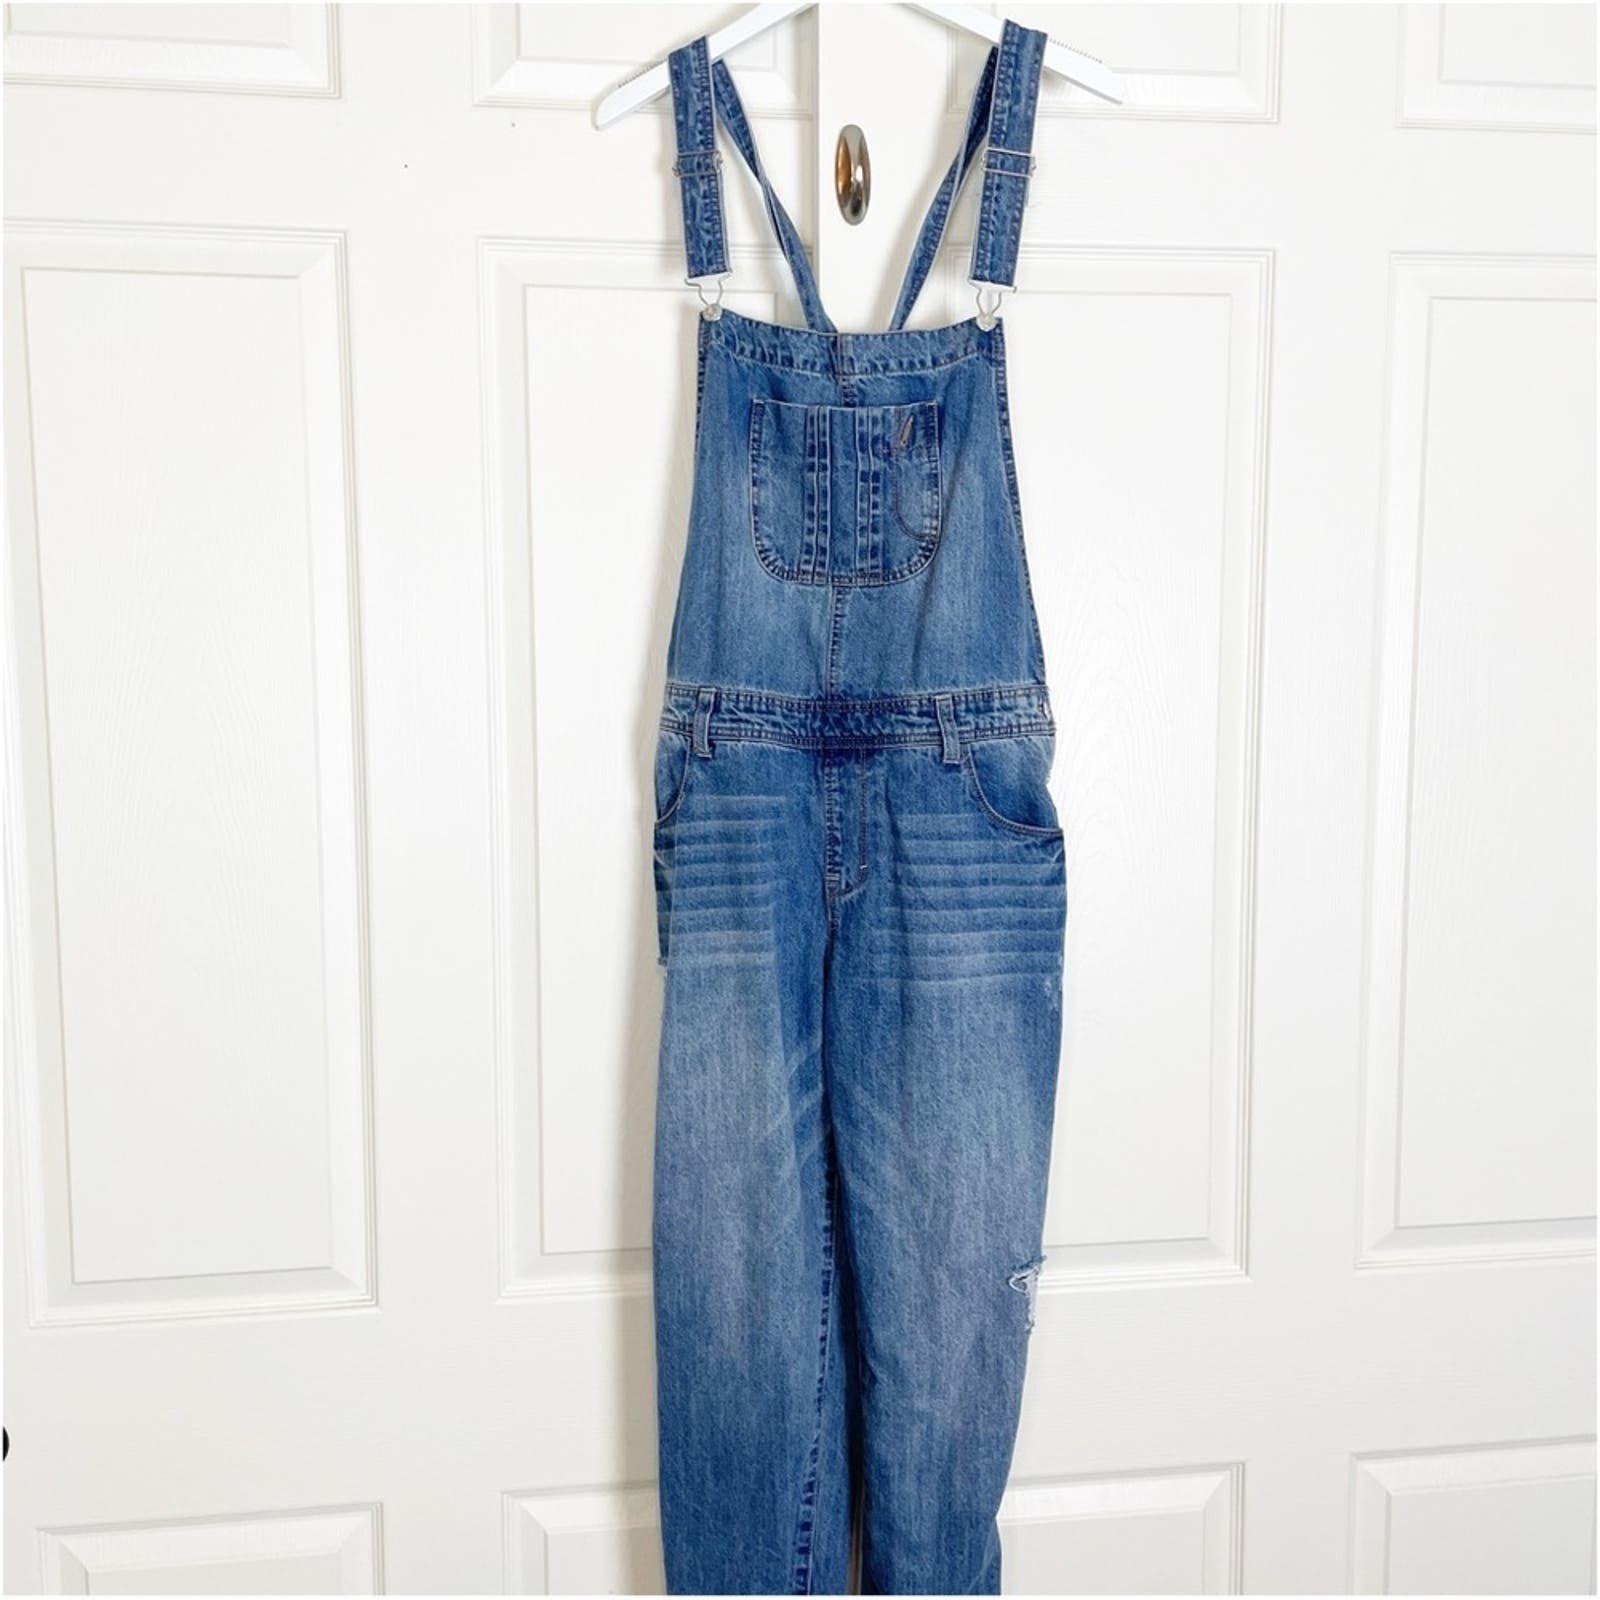 Affordable Kensie Distressed Denim Overalls iSQc7A326 O